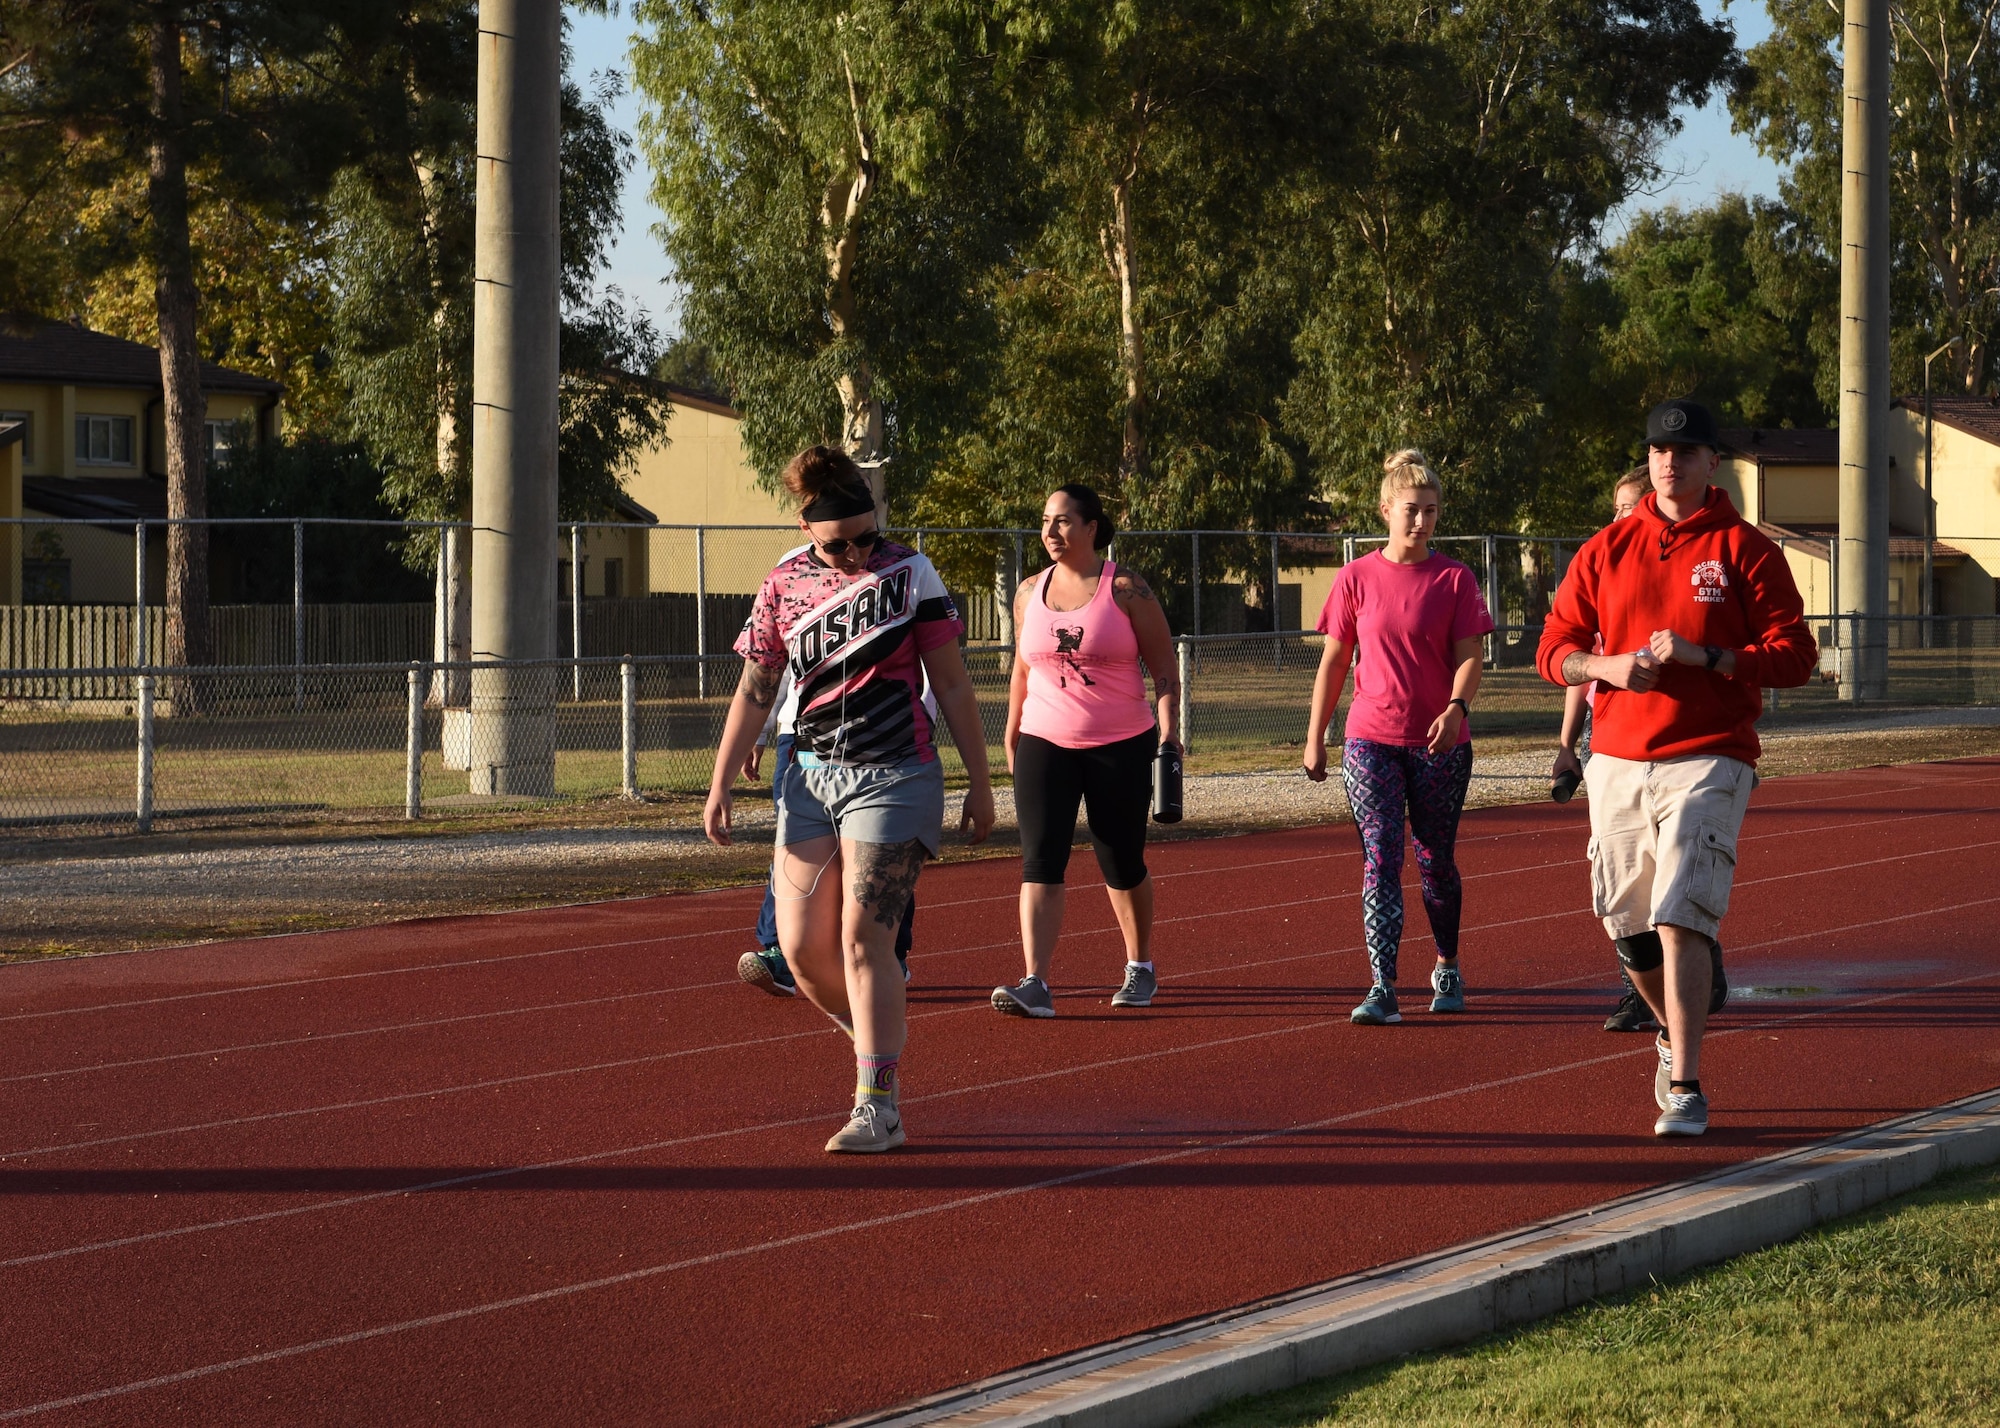 Base members walk around the track for two hours in support of a breast cancer awareness walk-a-thon at Incirlik AB, Turkey, Oct. 27, 2017. October is nationally known as Breast Cancer Awareness month and is meant to bring attention to the need for cancer research and early cancer prevention. (U.S. Air Force photo by Staff Sgt. Rebeccah Woodrow)